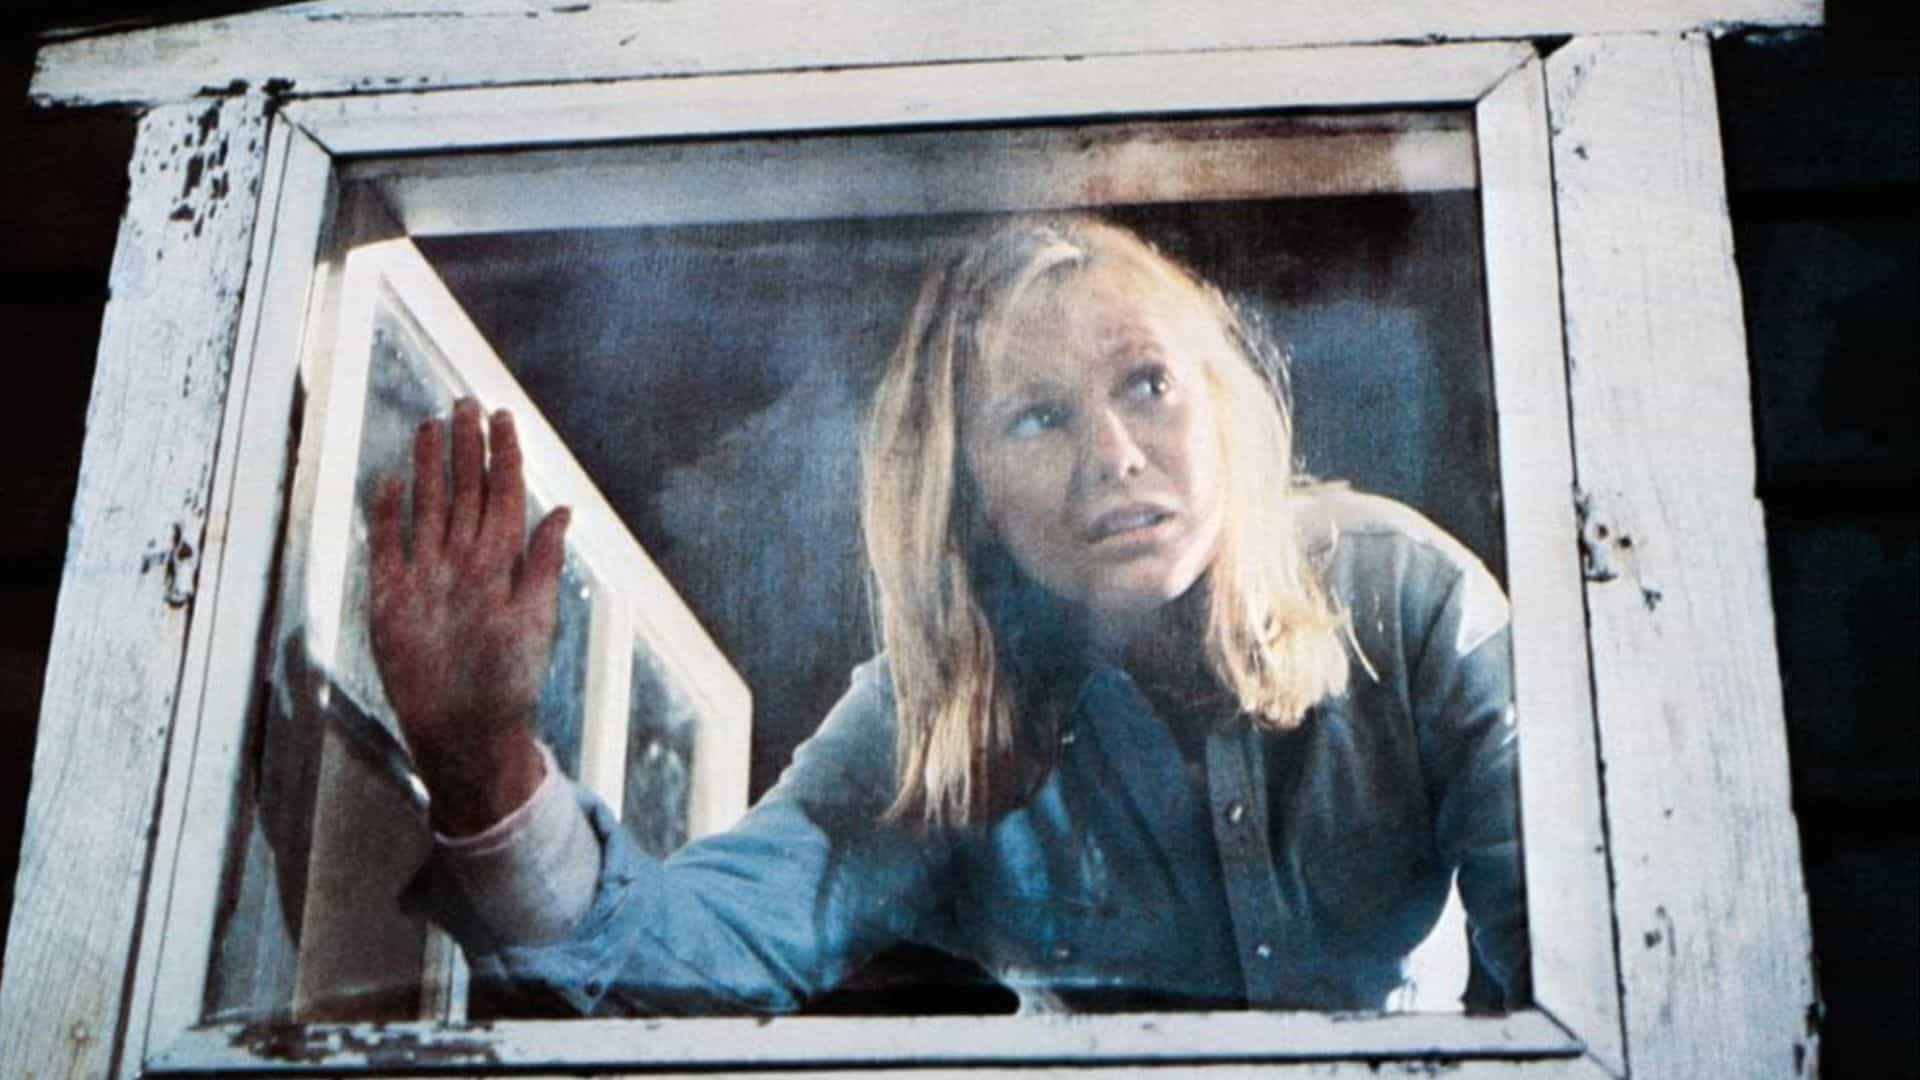  A woman presses her hand against a window in this image from Georgetown Productions Inc.